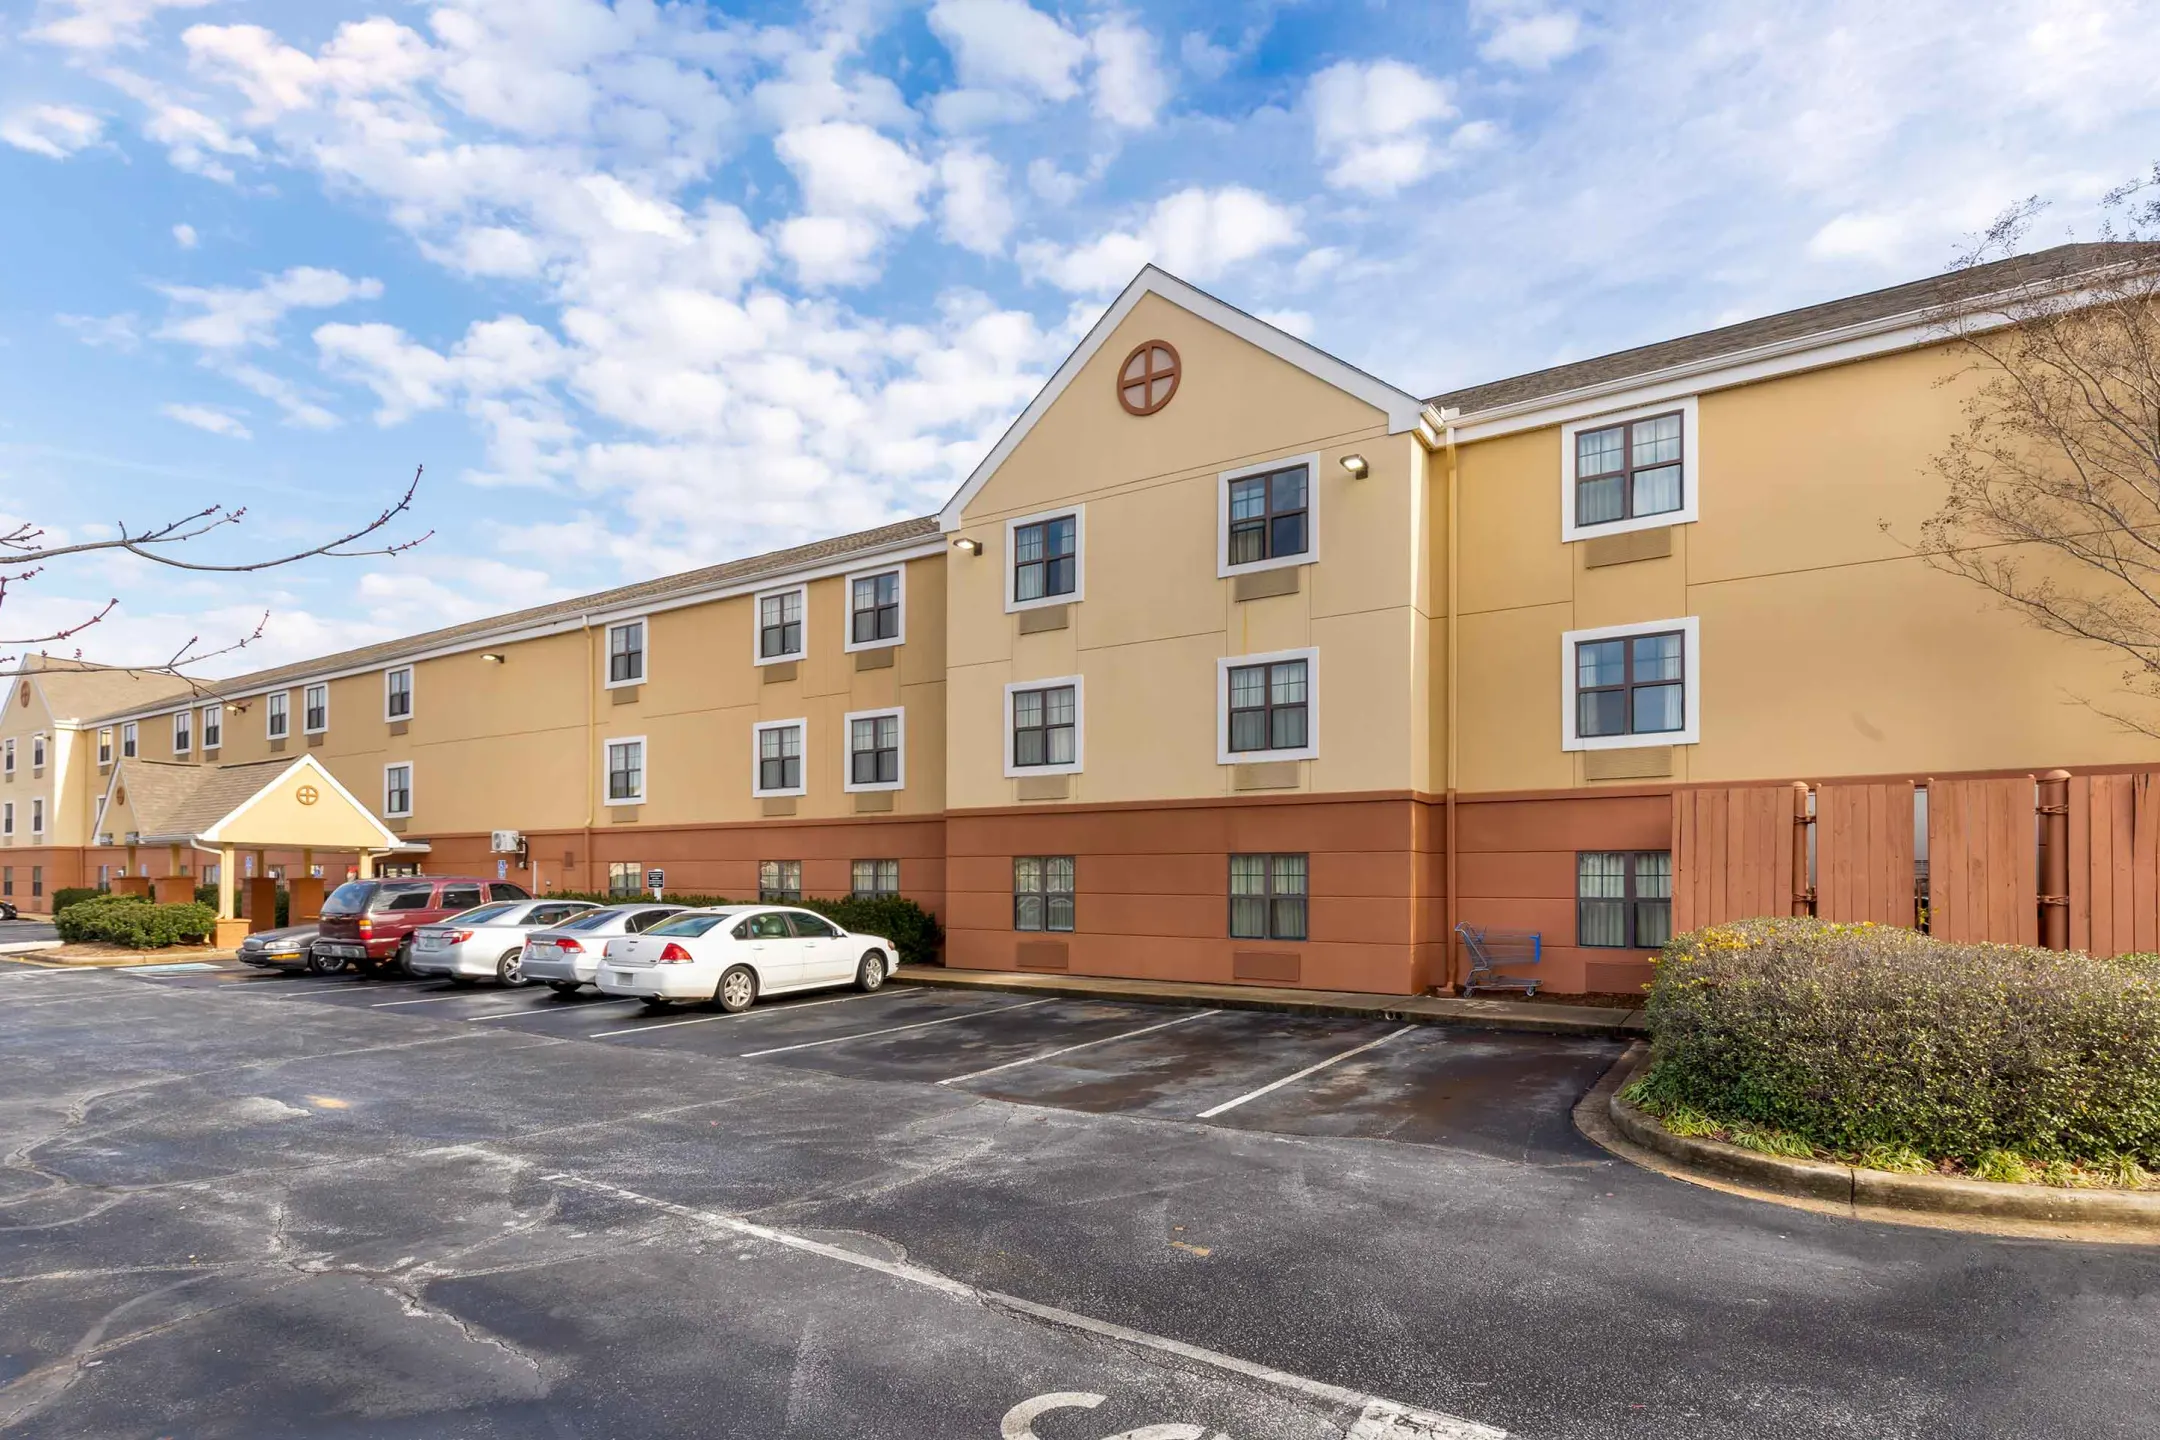 Building - Furnished Studio - Greenville - Airport - Greenville, SC